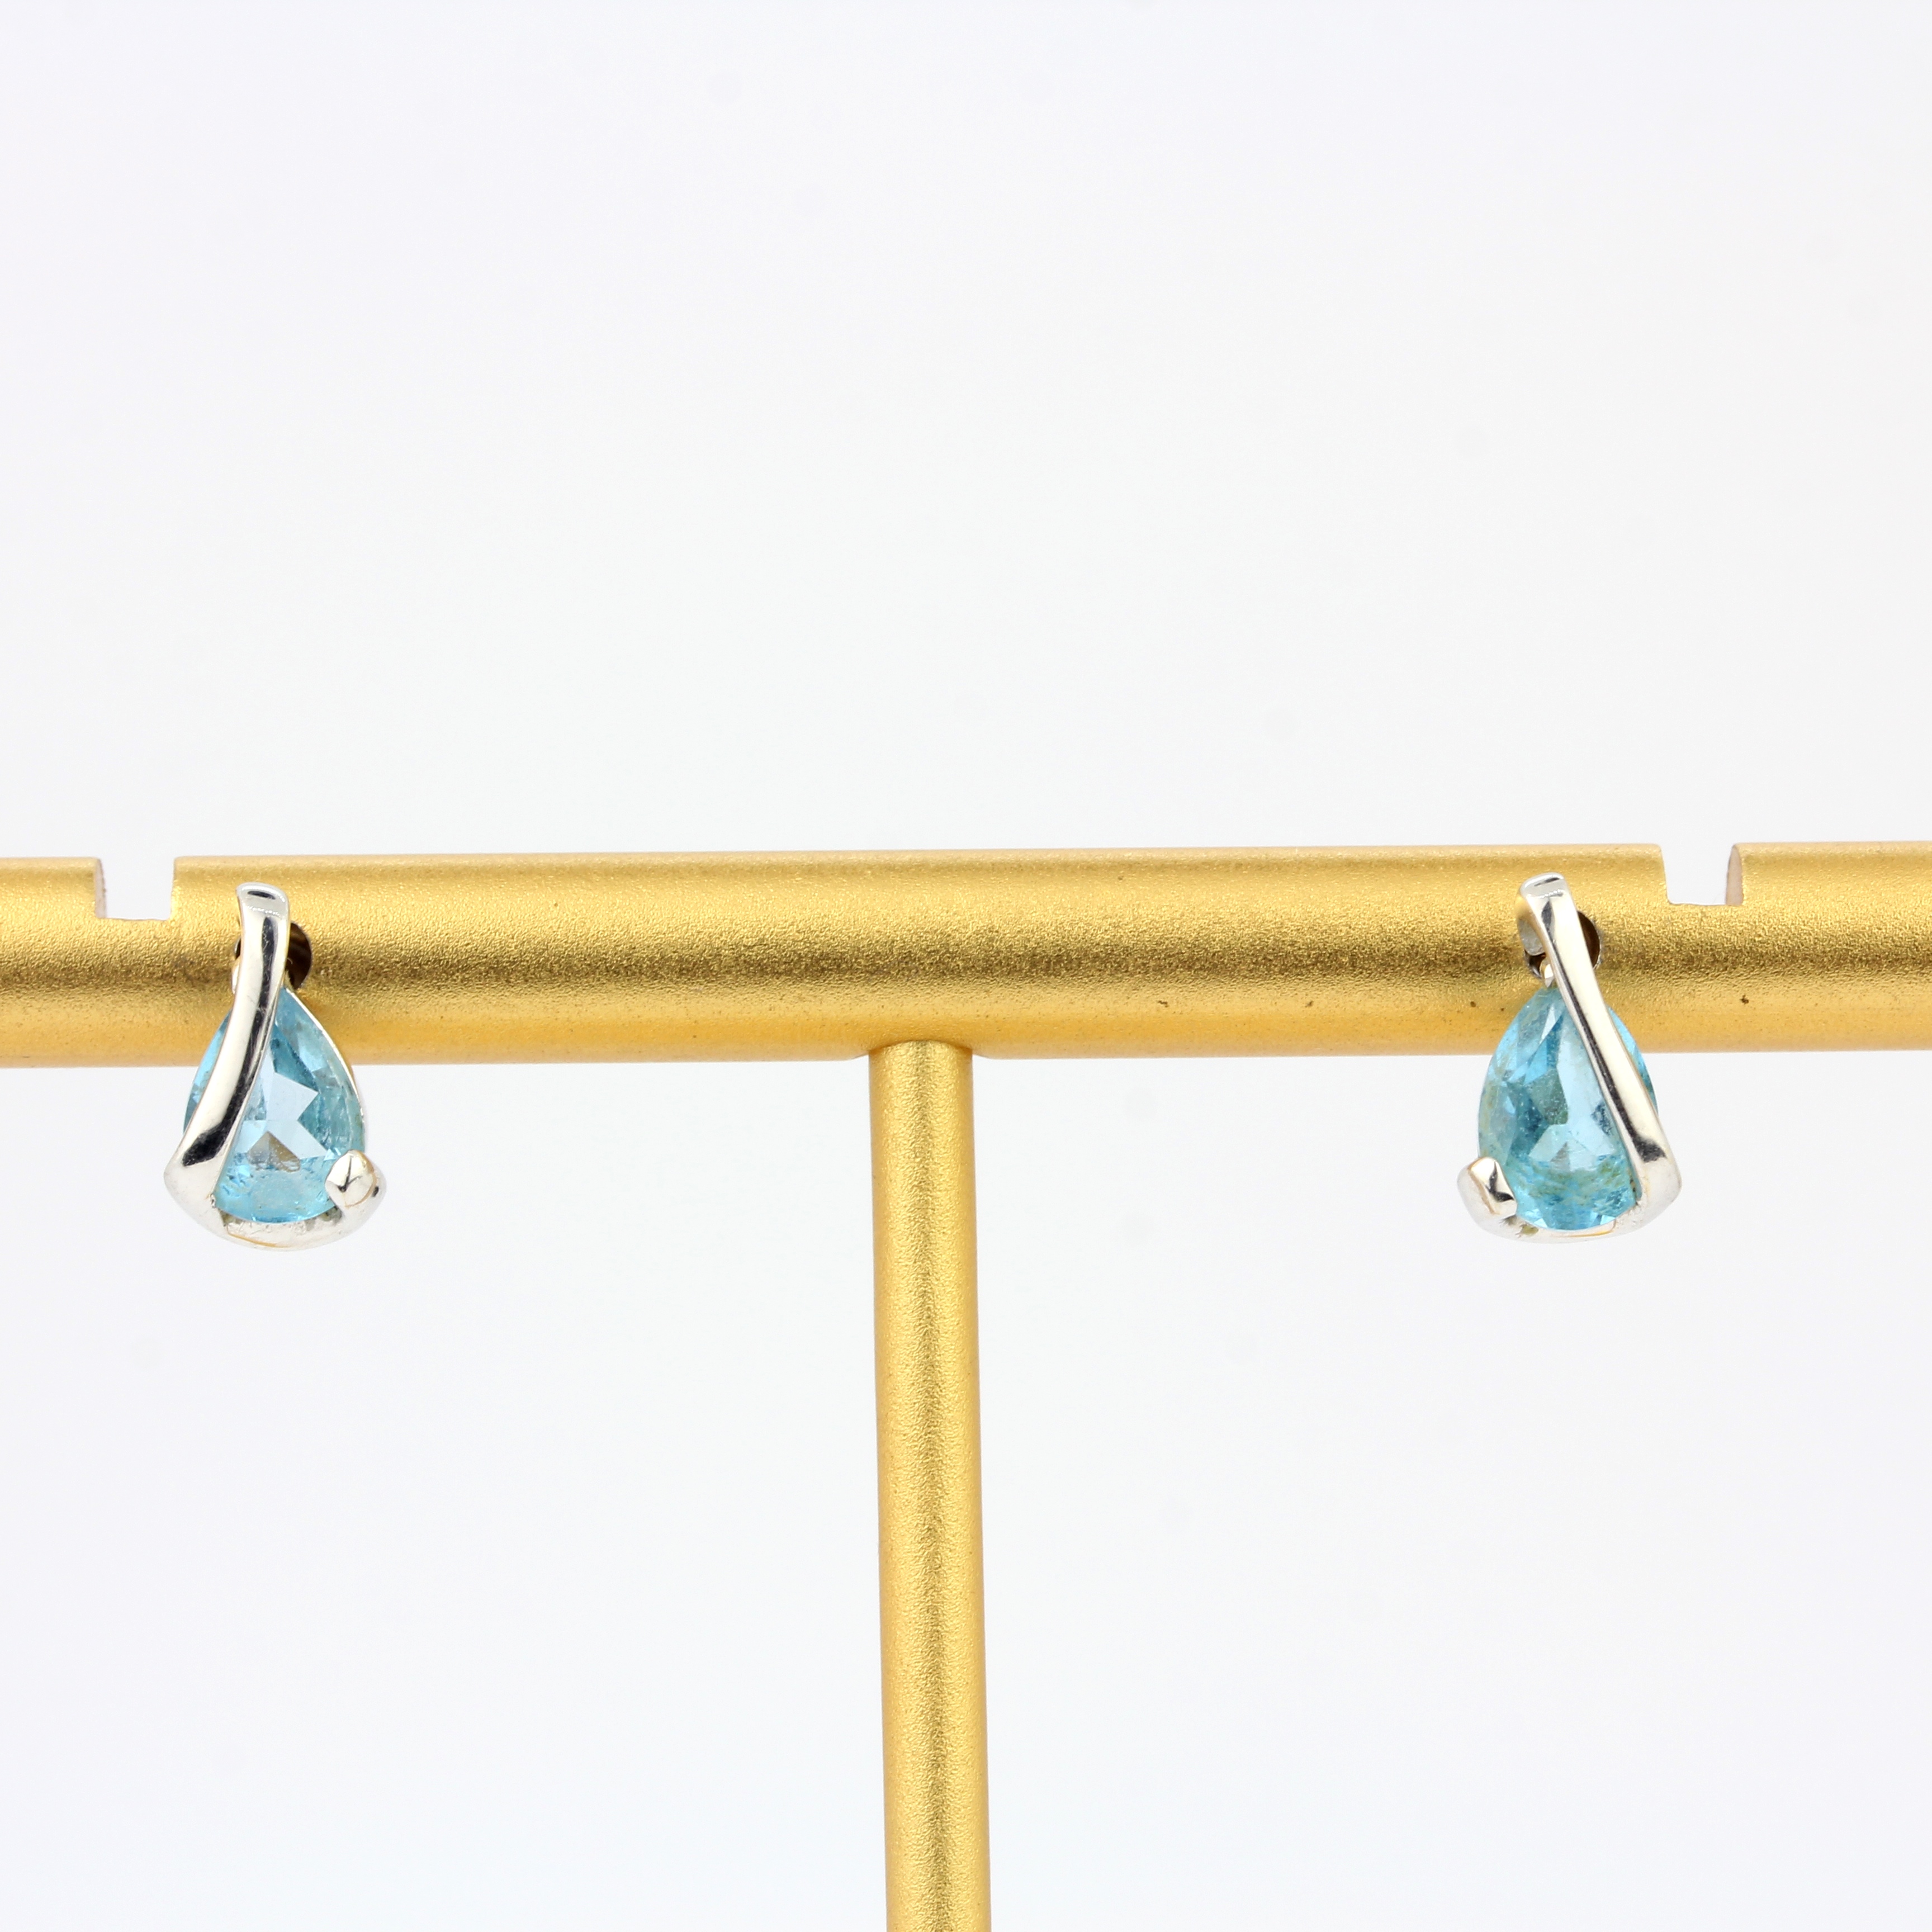 A pair of 925 silver earrings set with pear cut blue topaz, L. 1cm.